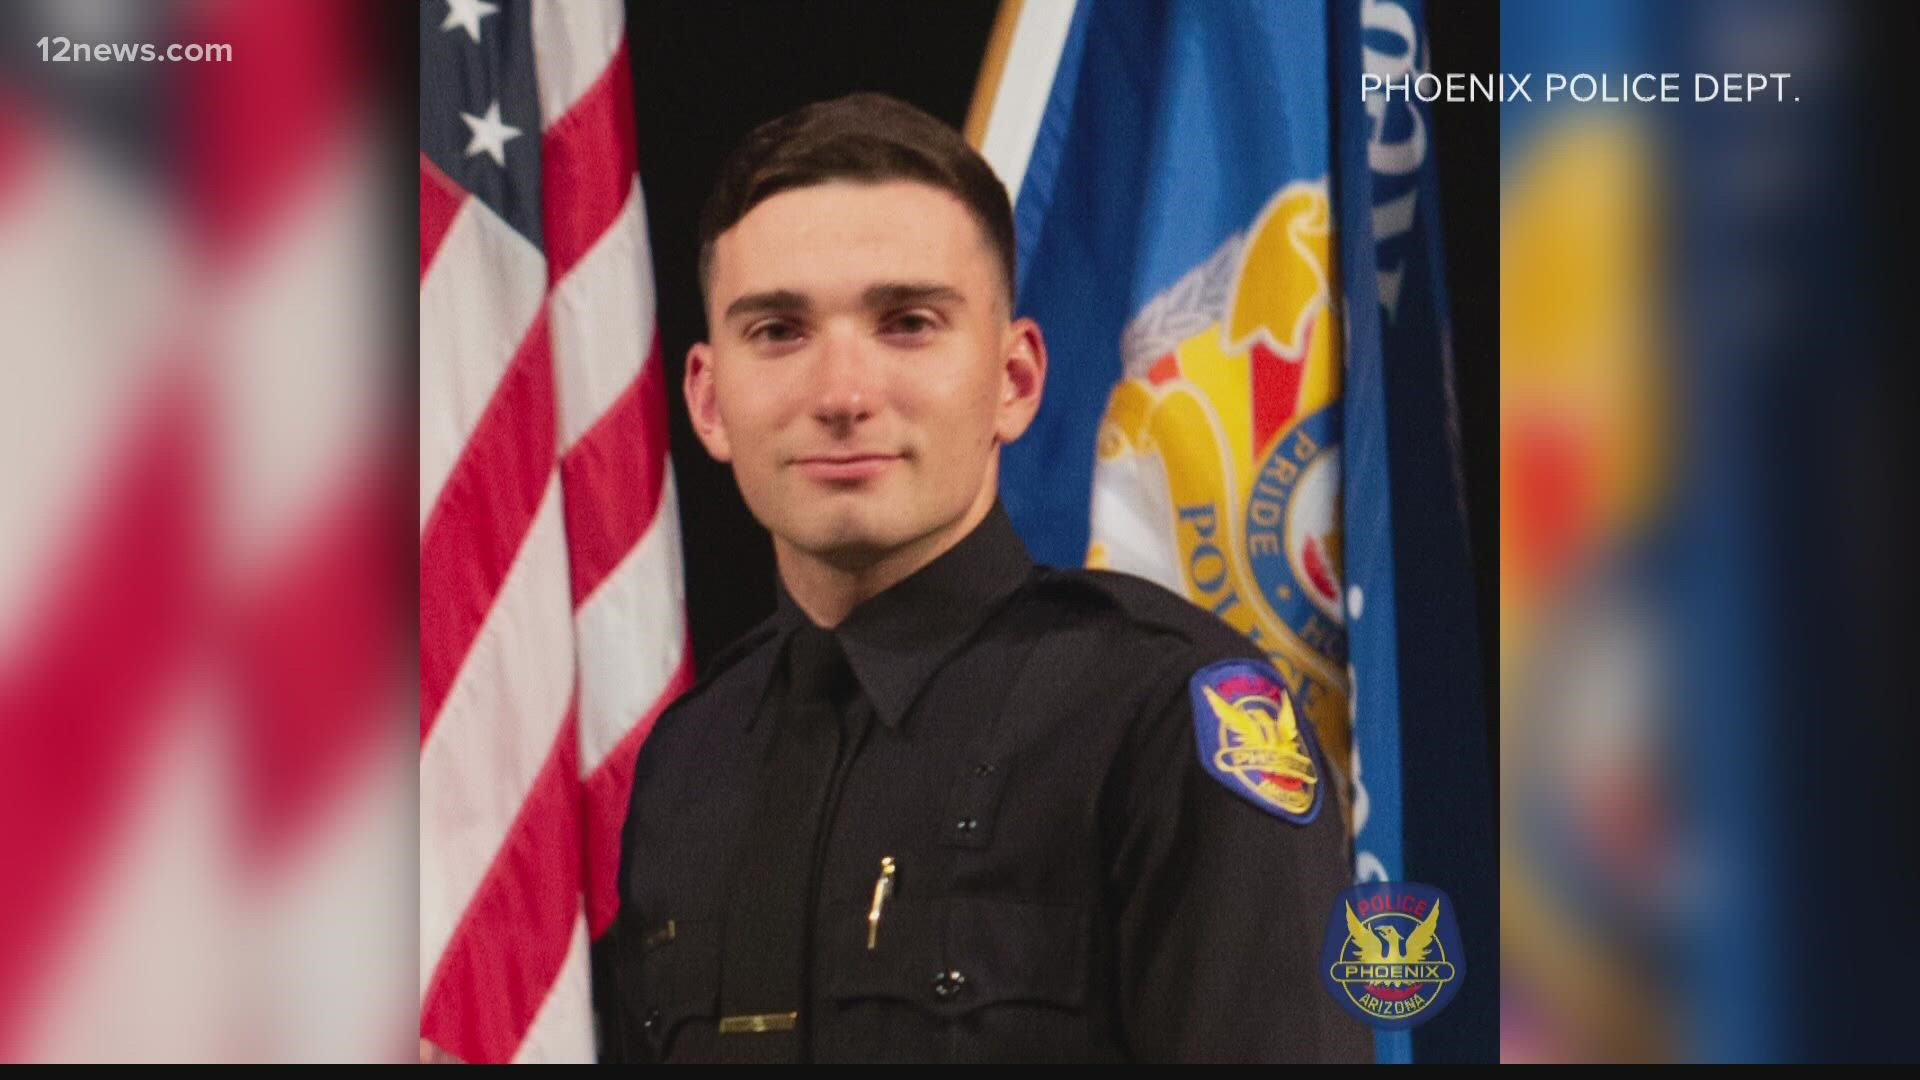 The family of 22-year-old Phoenix Police Officer Tyler Moldovan is still holding onto hope as he remains on life support.